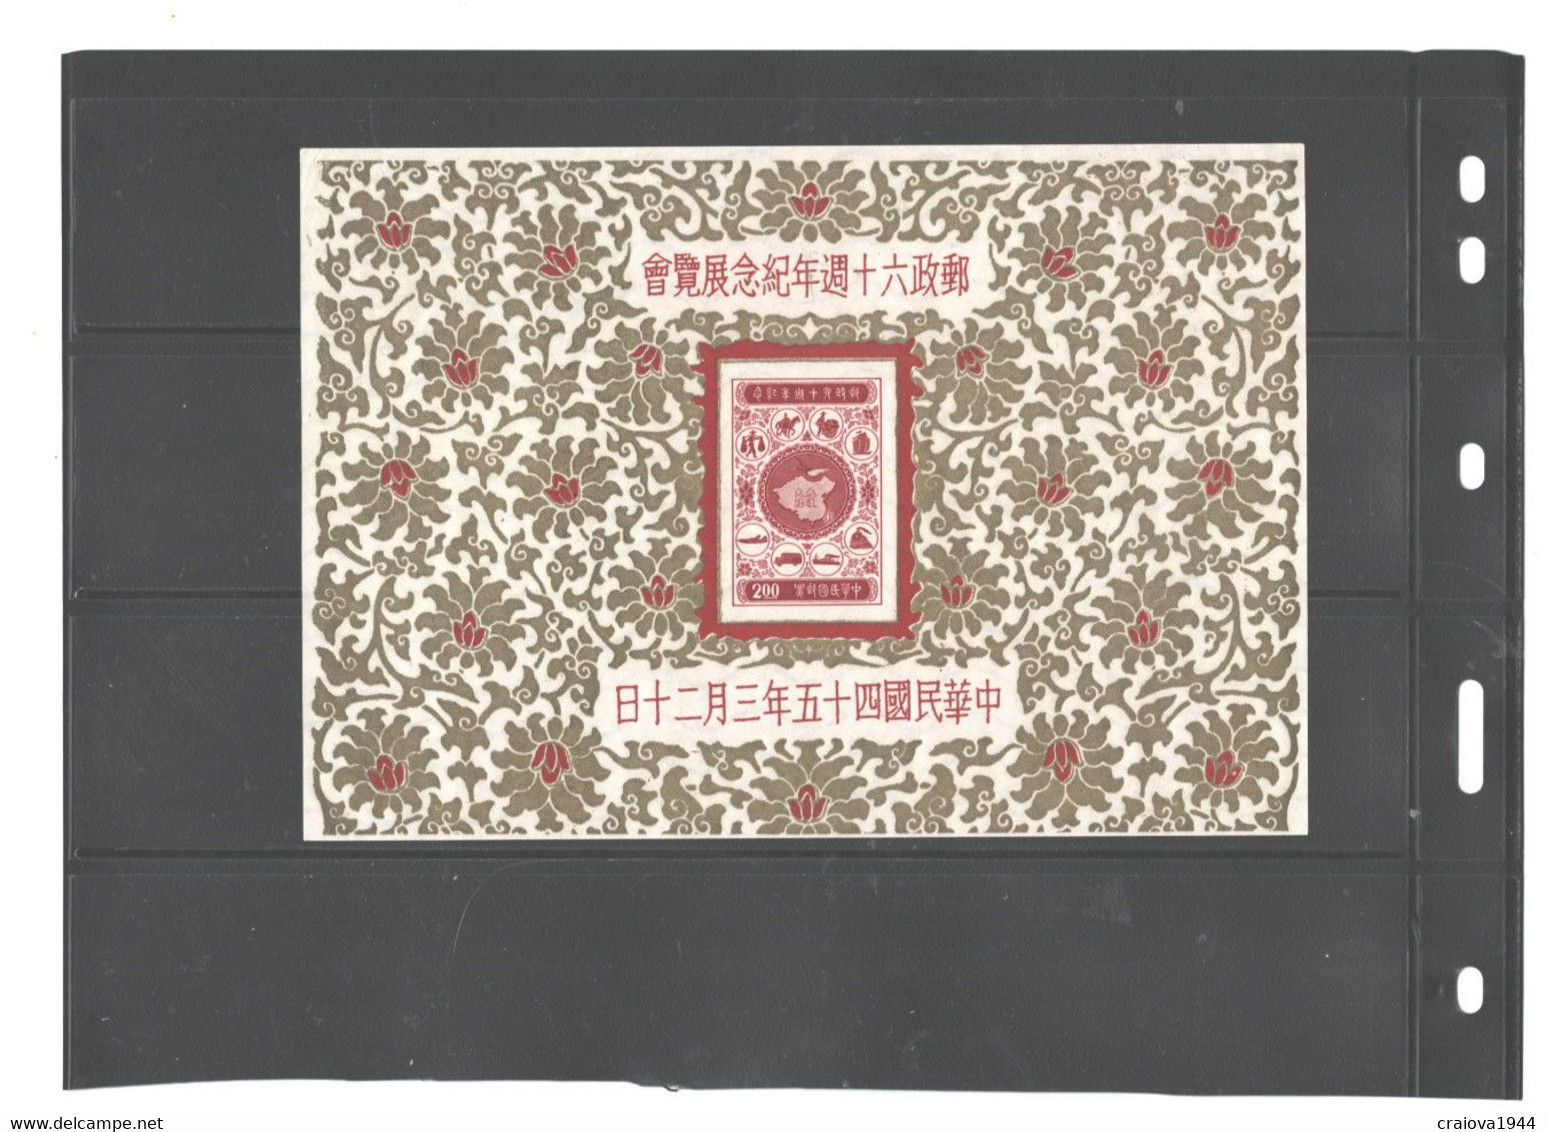 REPUBLIC OF CHINA 1956 MS#1136 MNH NO GUM AS ISSUED - Nuovi